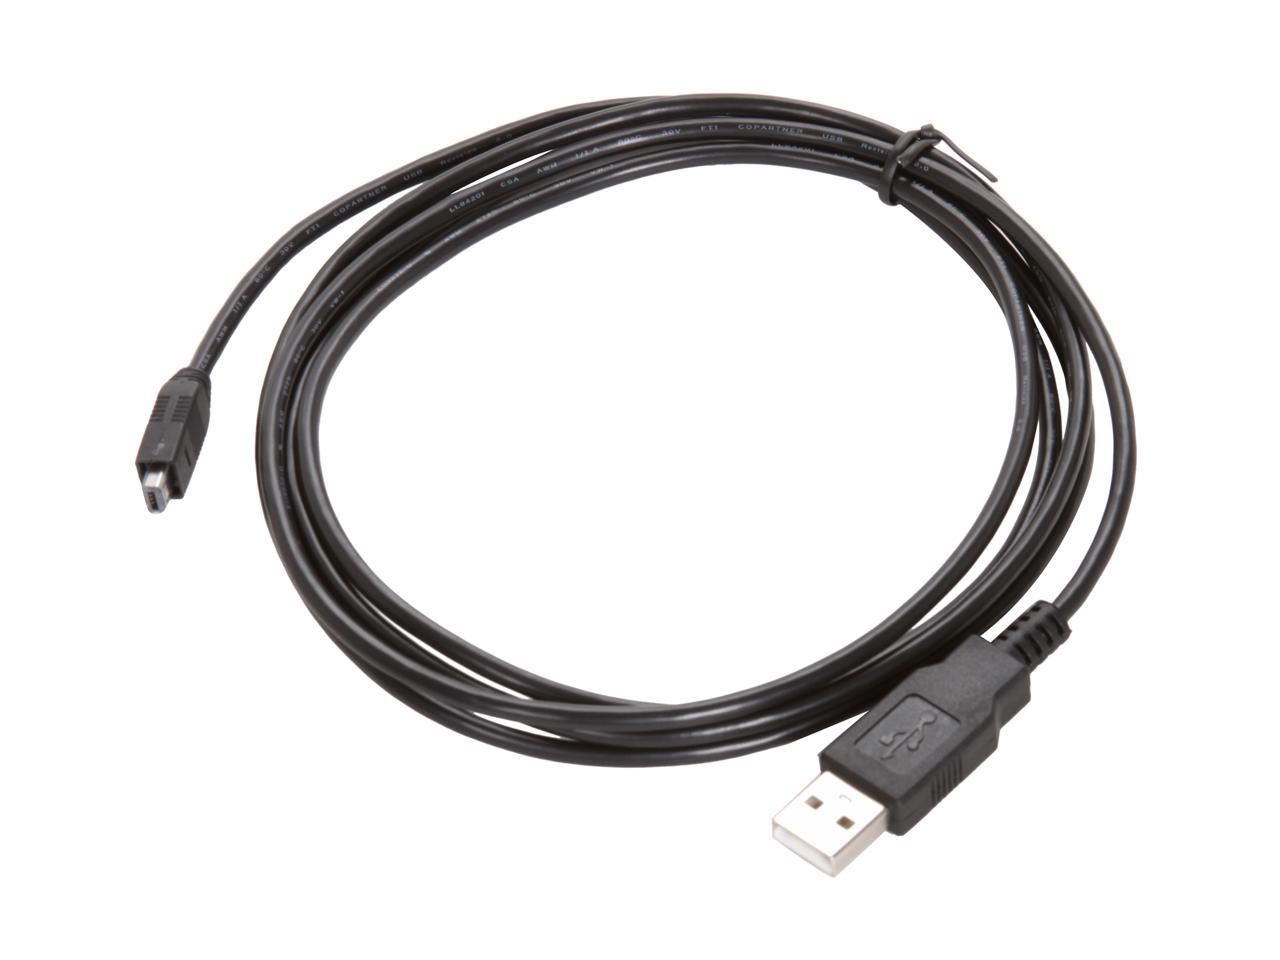 Rosewill 6ft Usb20 A Male To Usb Mini 4 Pin Cable Square Connector Model Rcw 109 Neweggca 2723